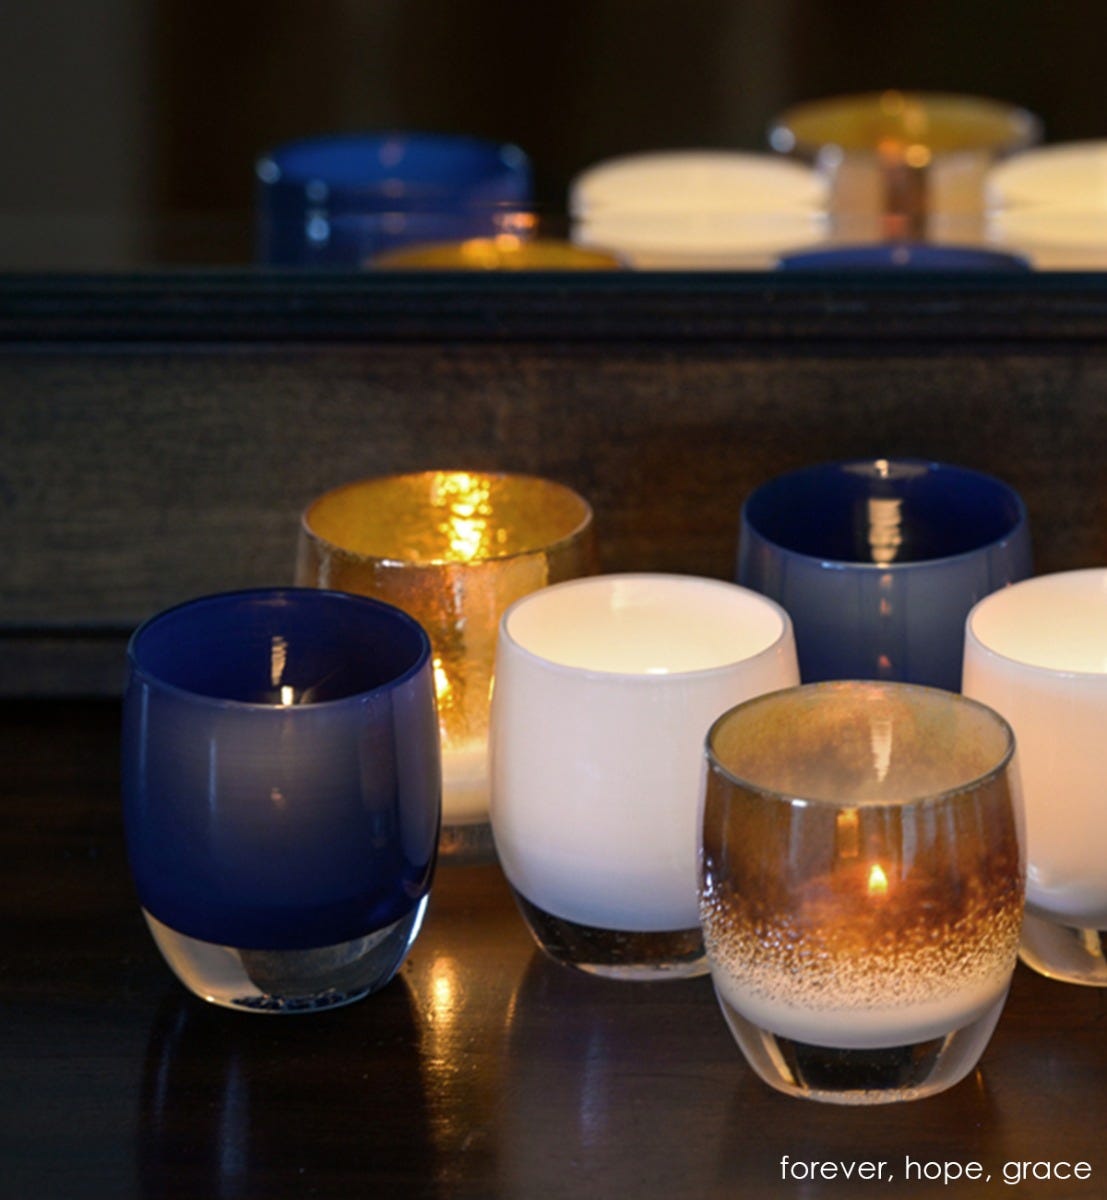 forever deep ocean hand-blown glass votive candle holder. Paired with hope and grace.